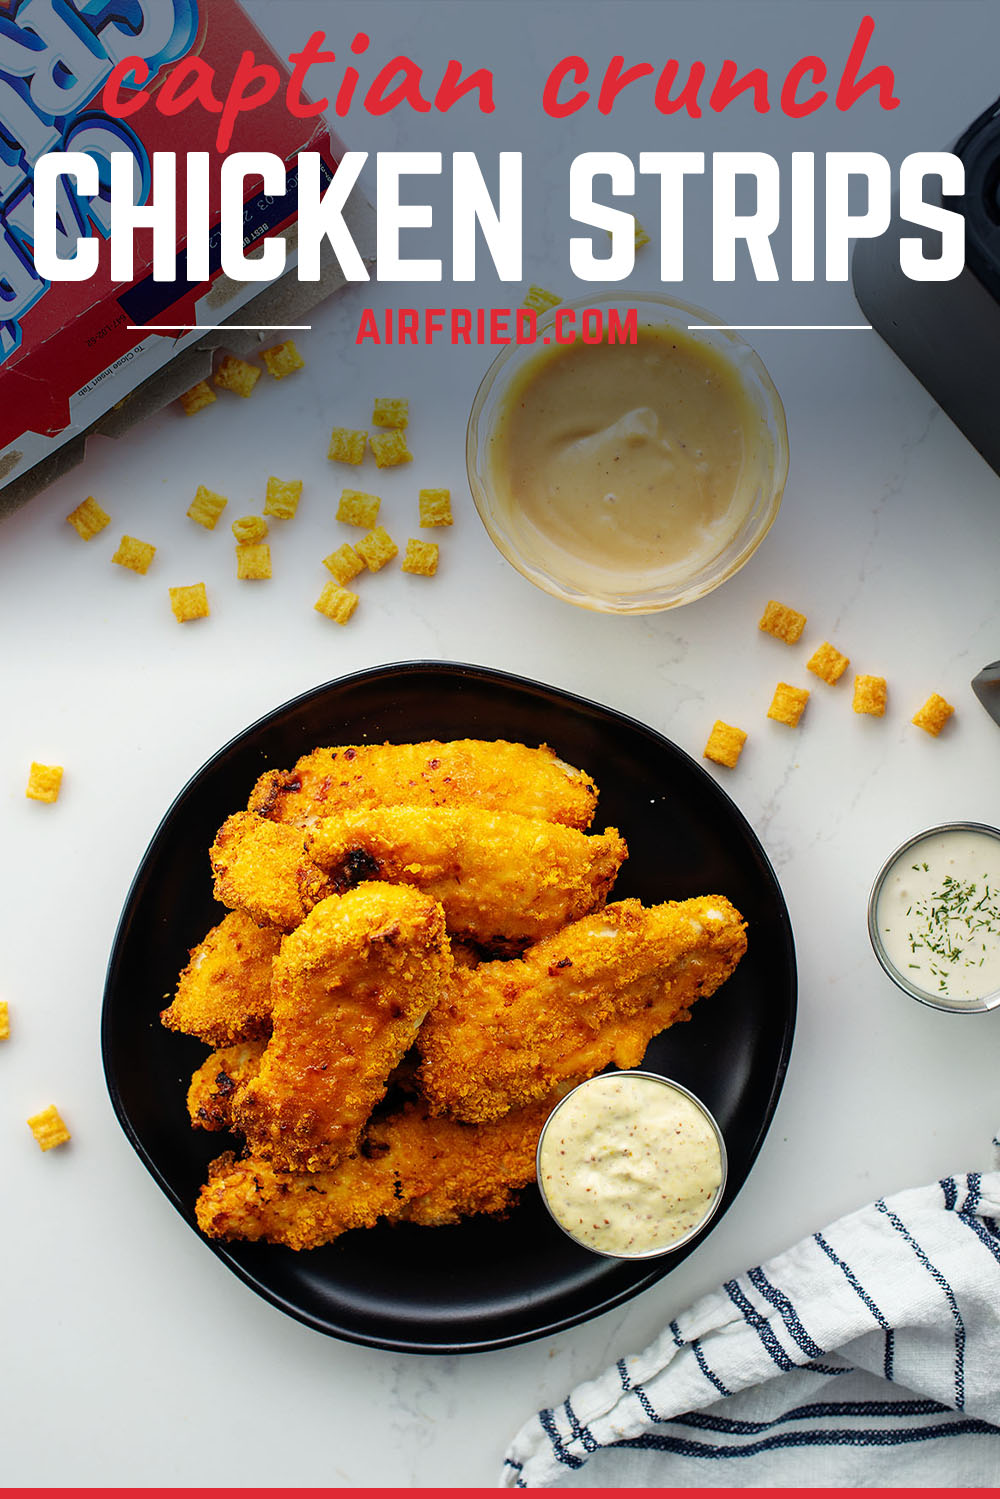 Captain cruch chicken strips are a copy cate of the very popular Planet Hollywood chicken strips.  This recipe uses the air fryer to keep the breading crisp and the chicken tender!